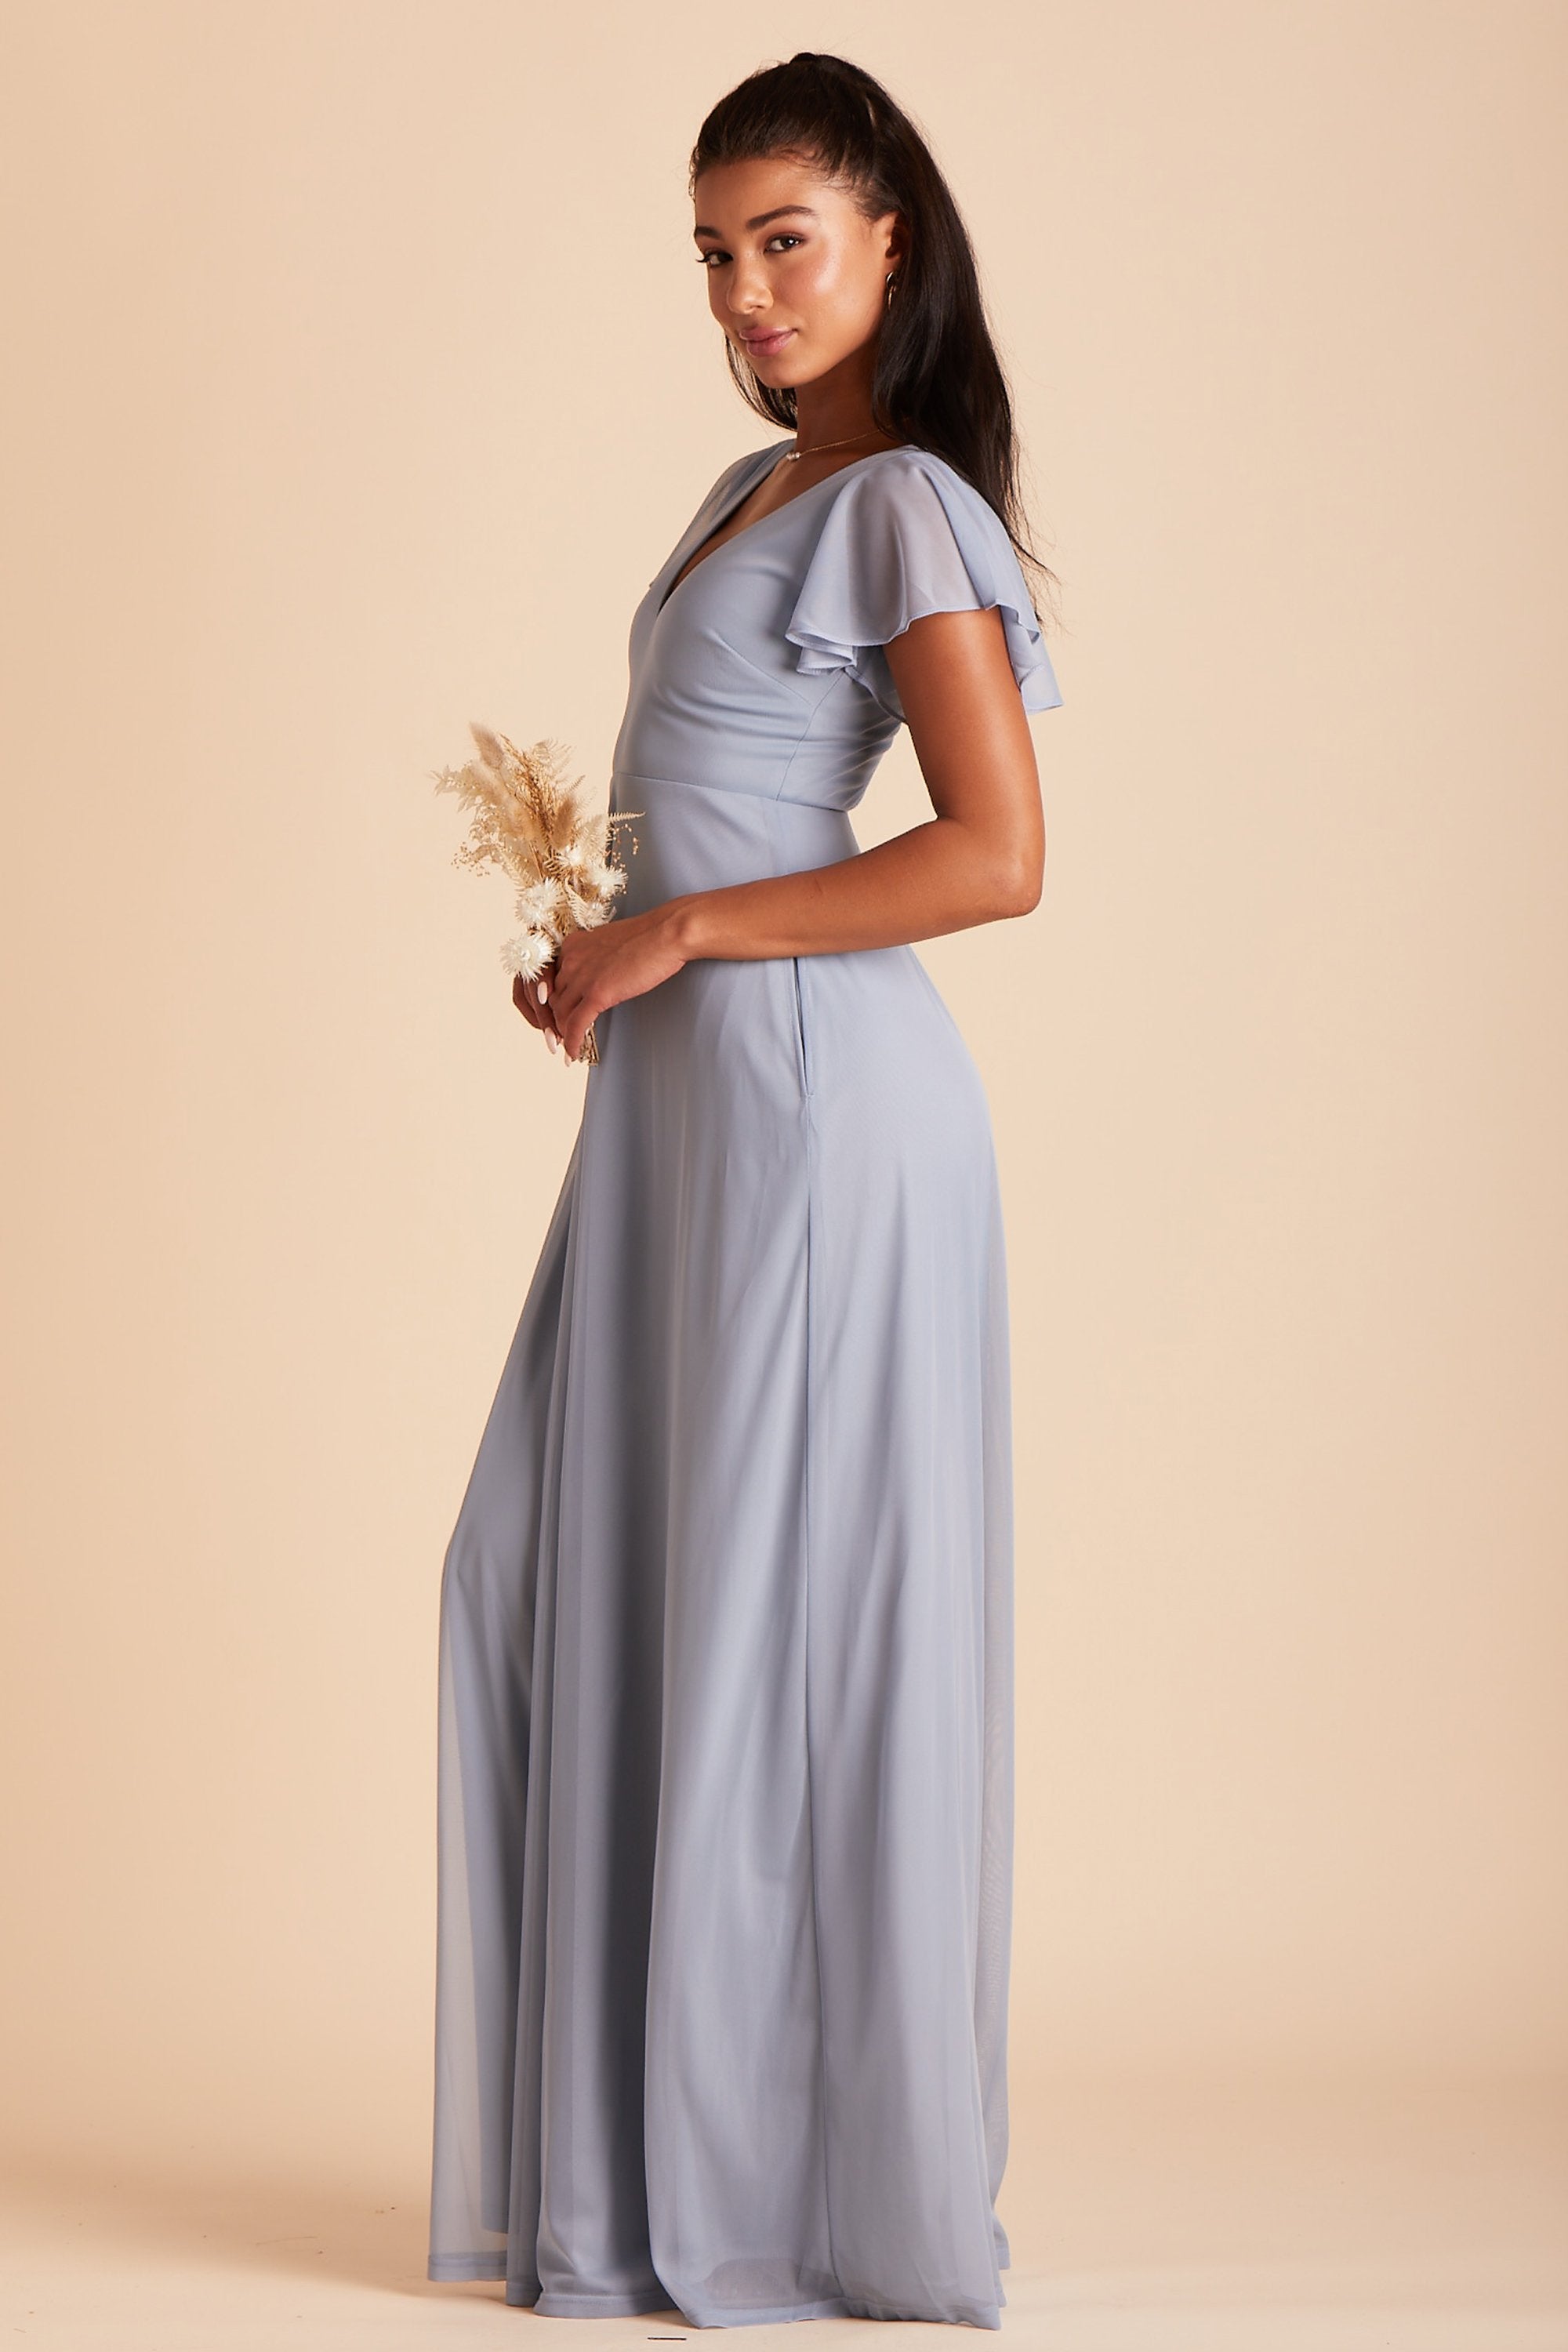 Hannah bridesmaids dress in dusty blue mesh by Birdy Grey, side view